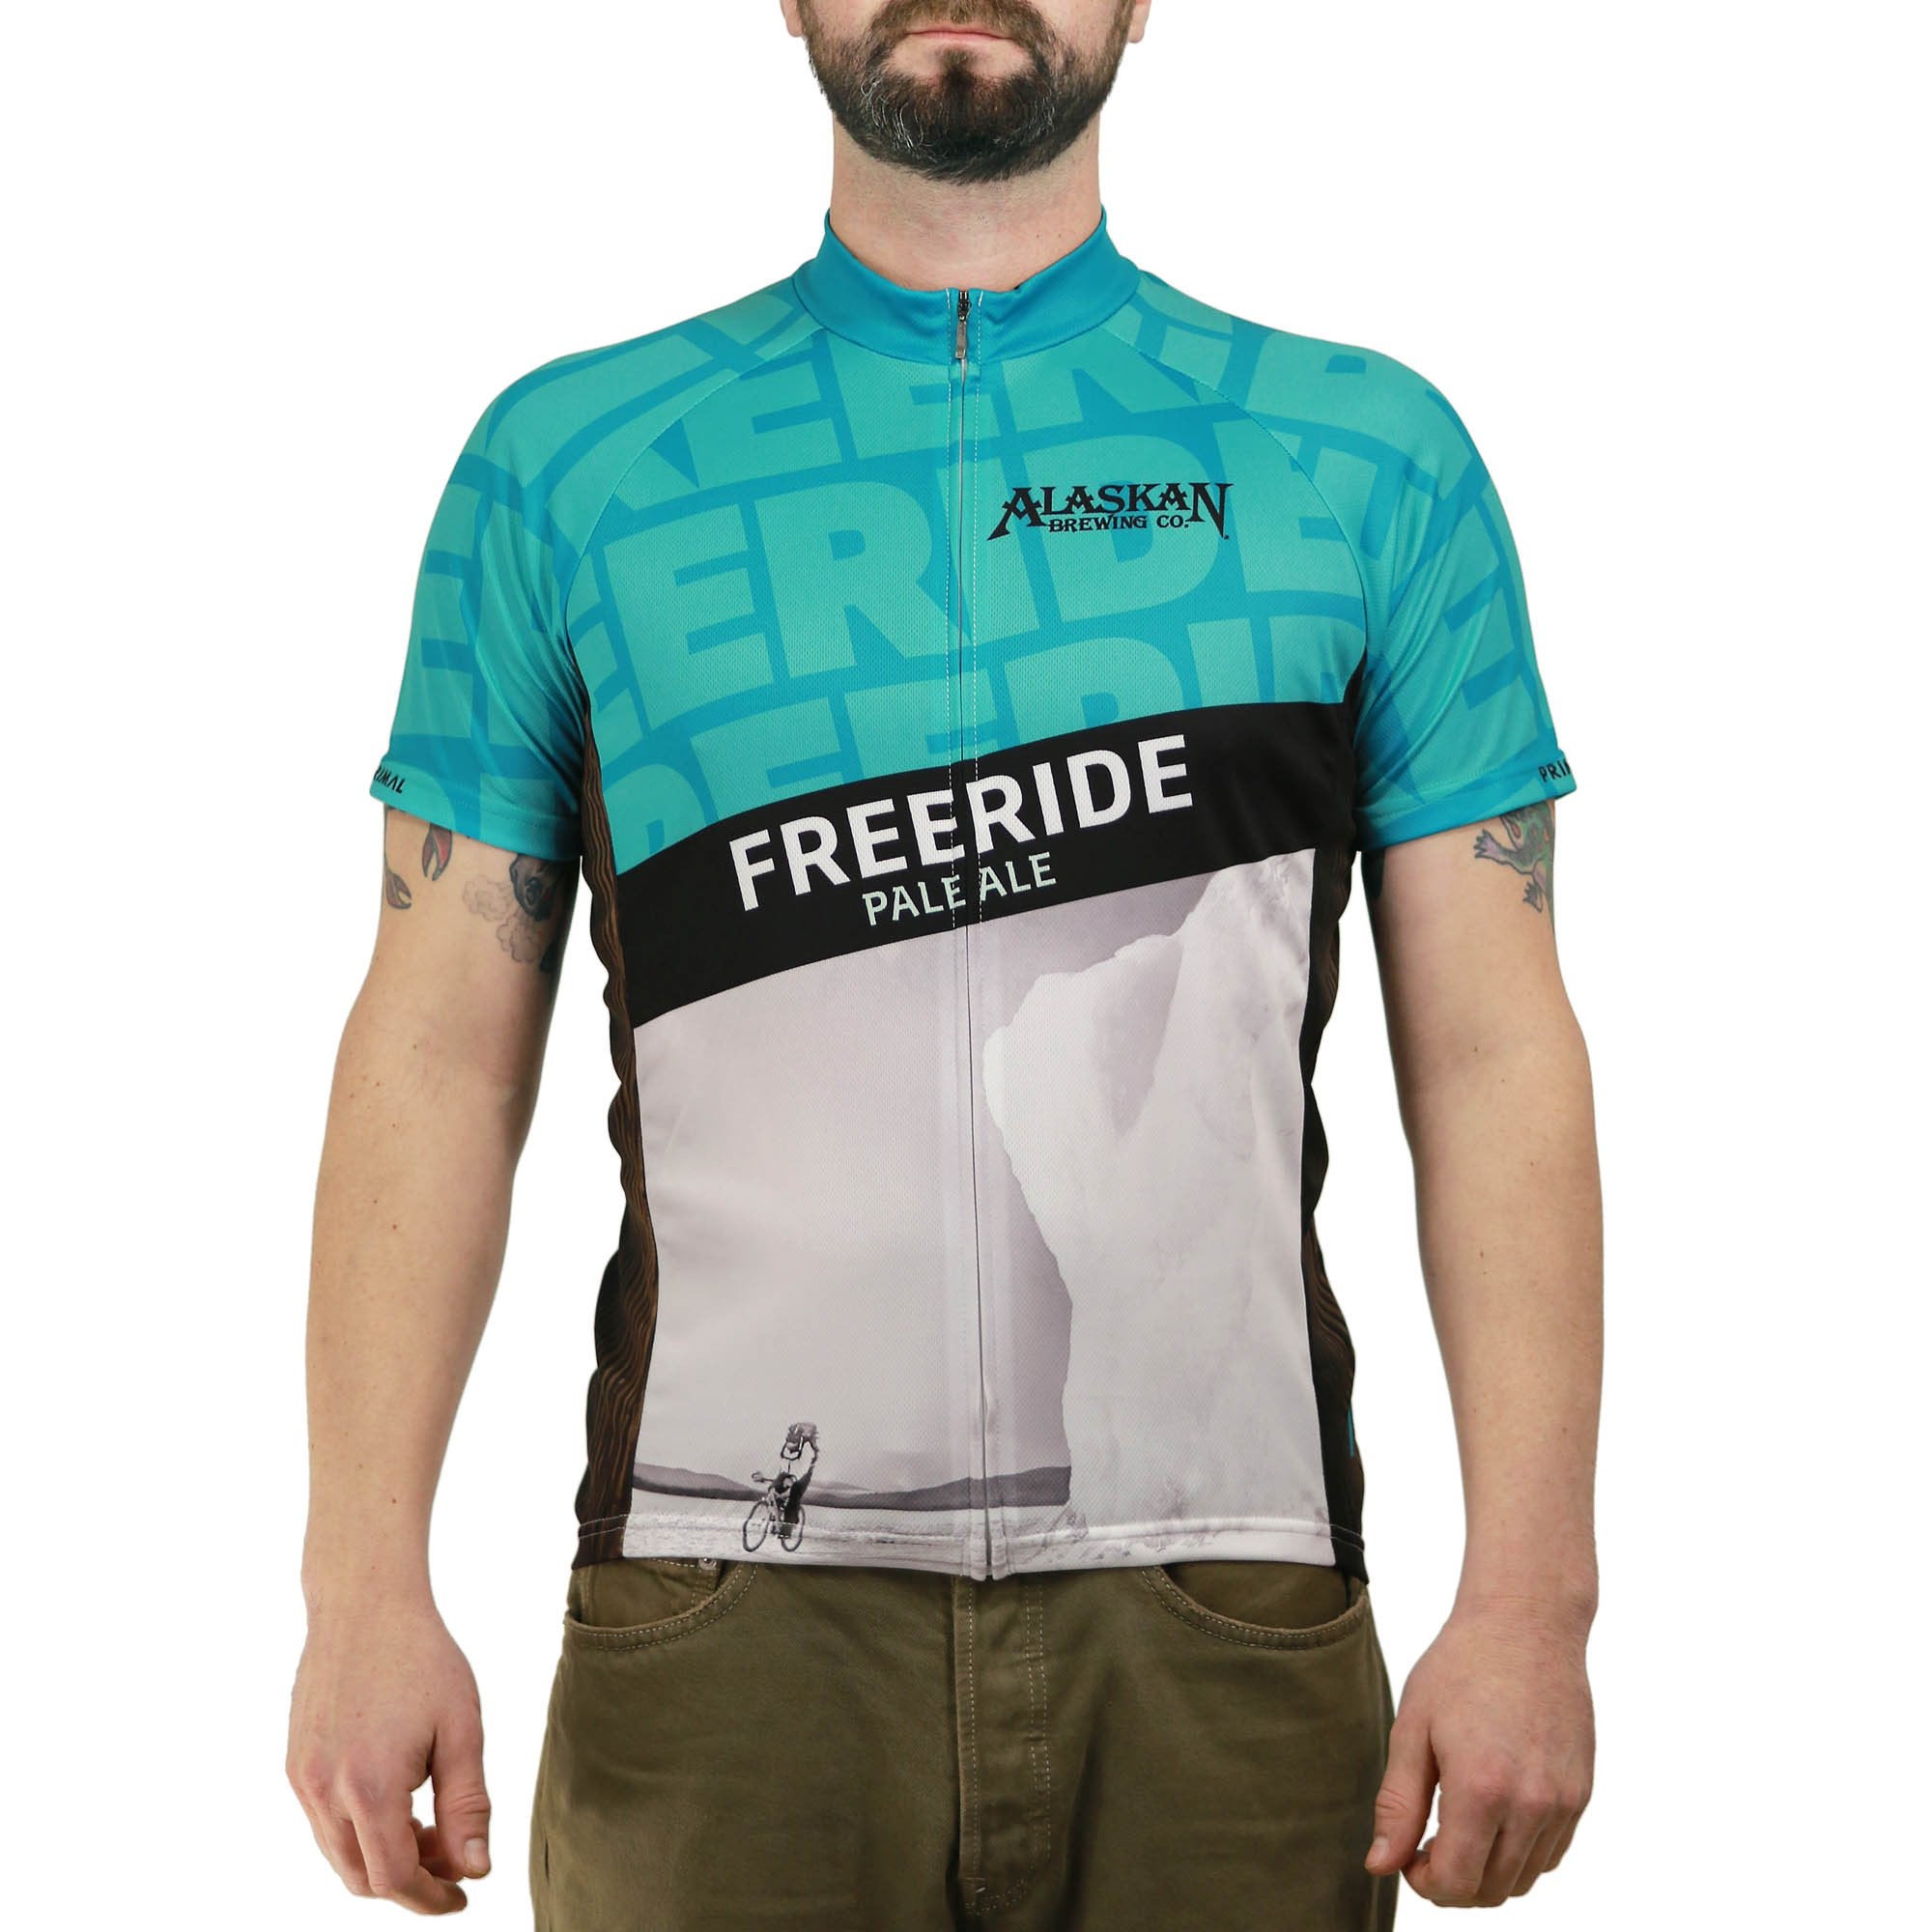 Primal Jersey Contest